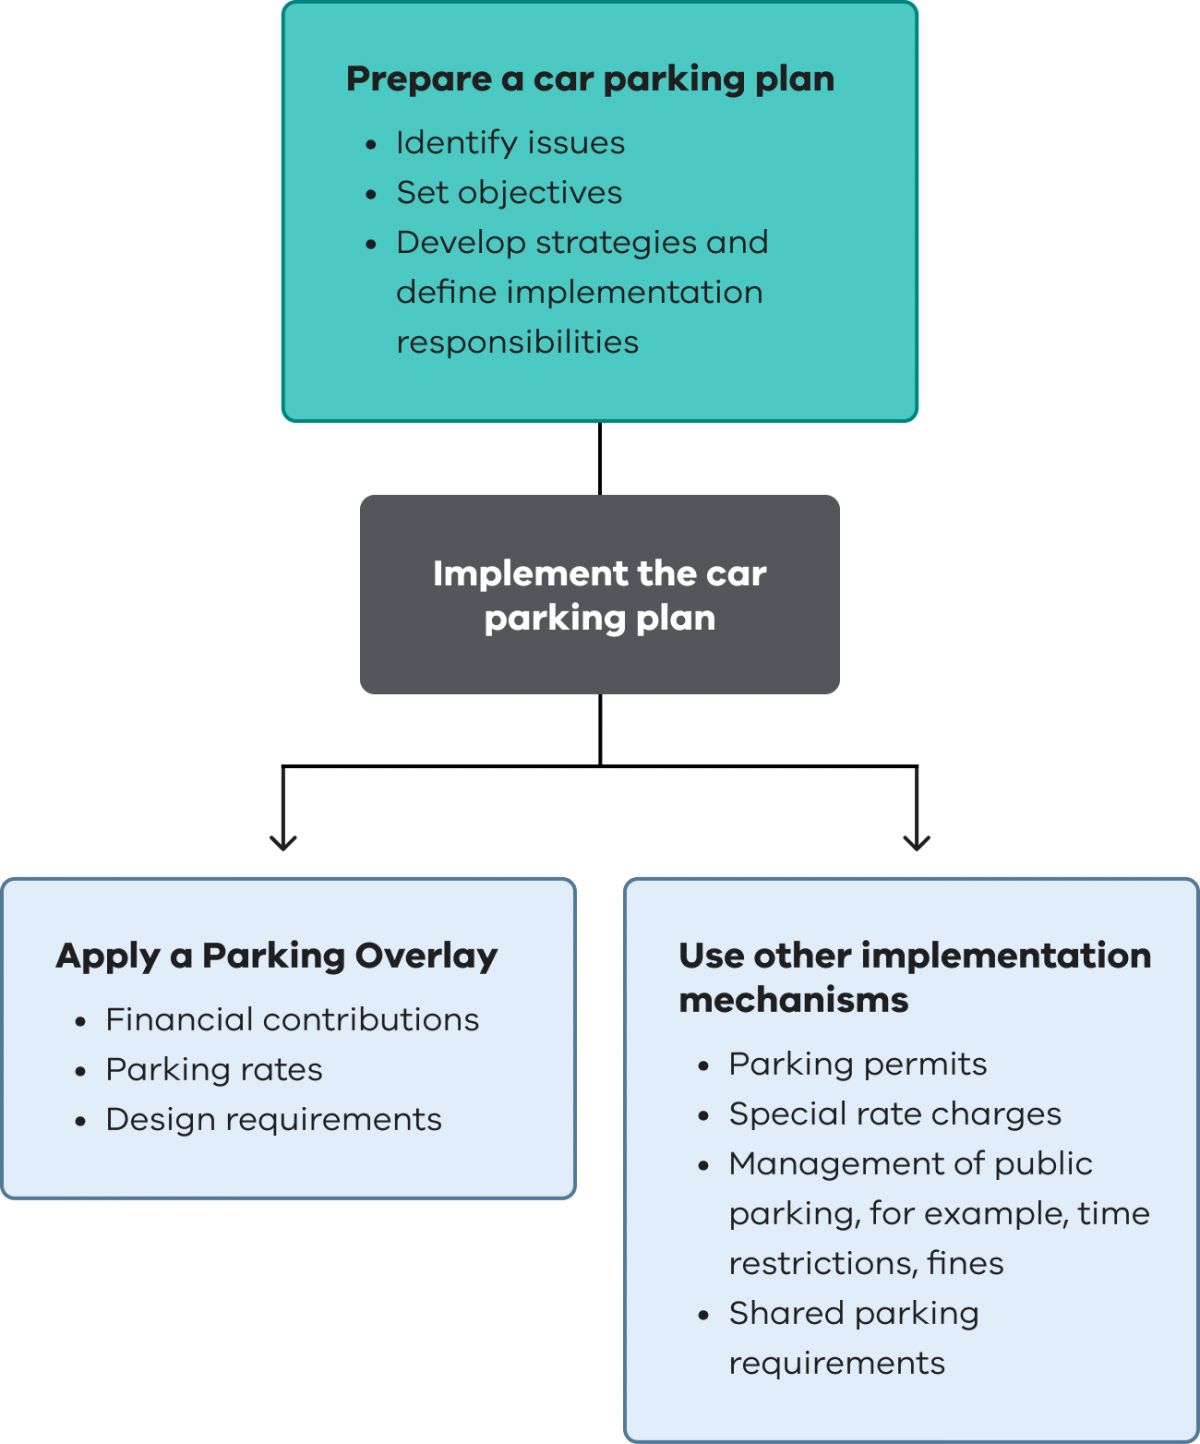 Prepare a car parking plan by identifying issues, set objectives, develop strategies and define implementation responsibilities. Implement the car parking plan. Apply a parking overlay by financial contributions, parking rates, design requirements. Use other implementation mechanisms by parking permits, special rate changes, management of public parking, for example, time restrictions, fines and shared parking requirements. 